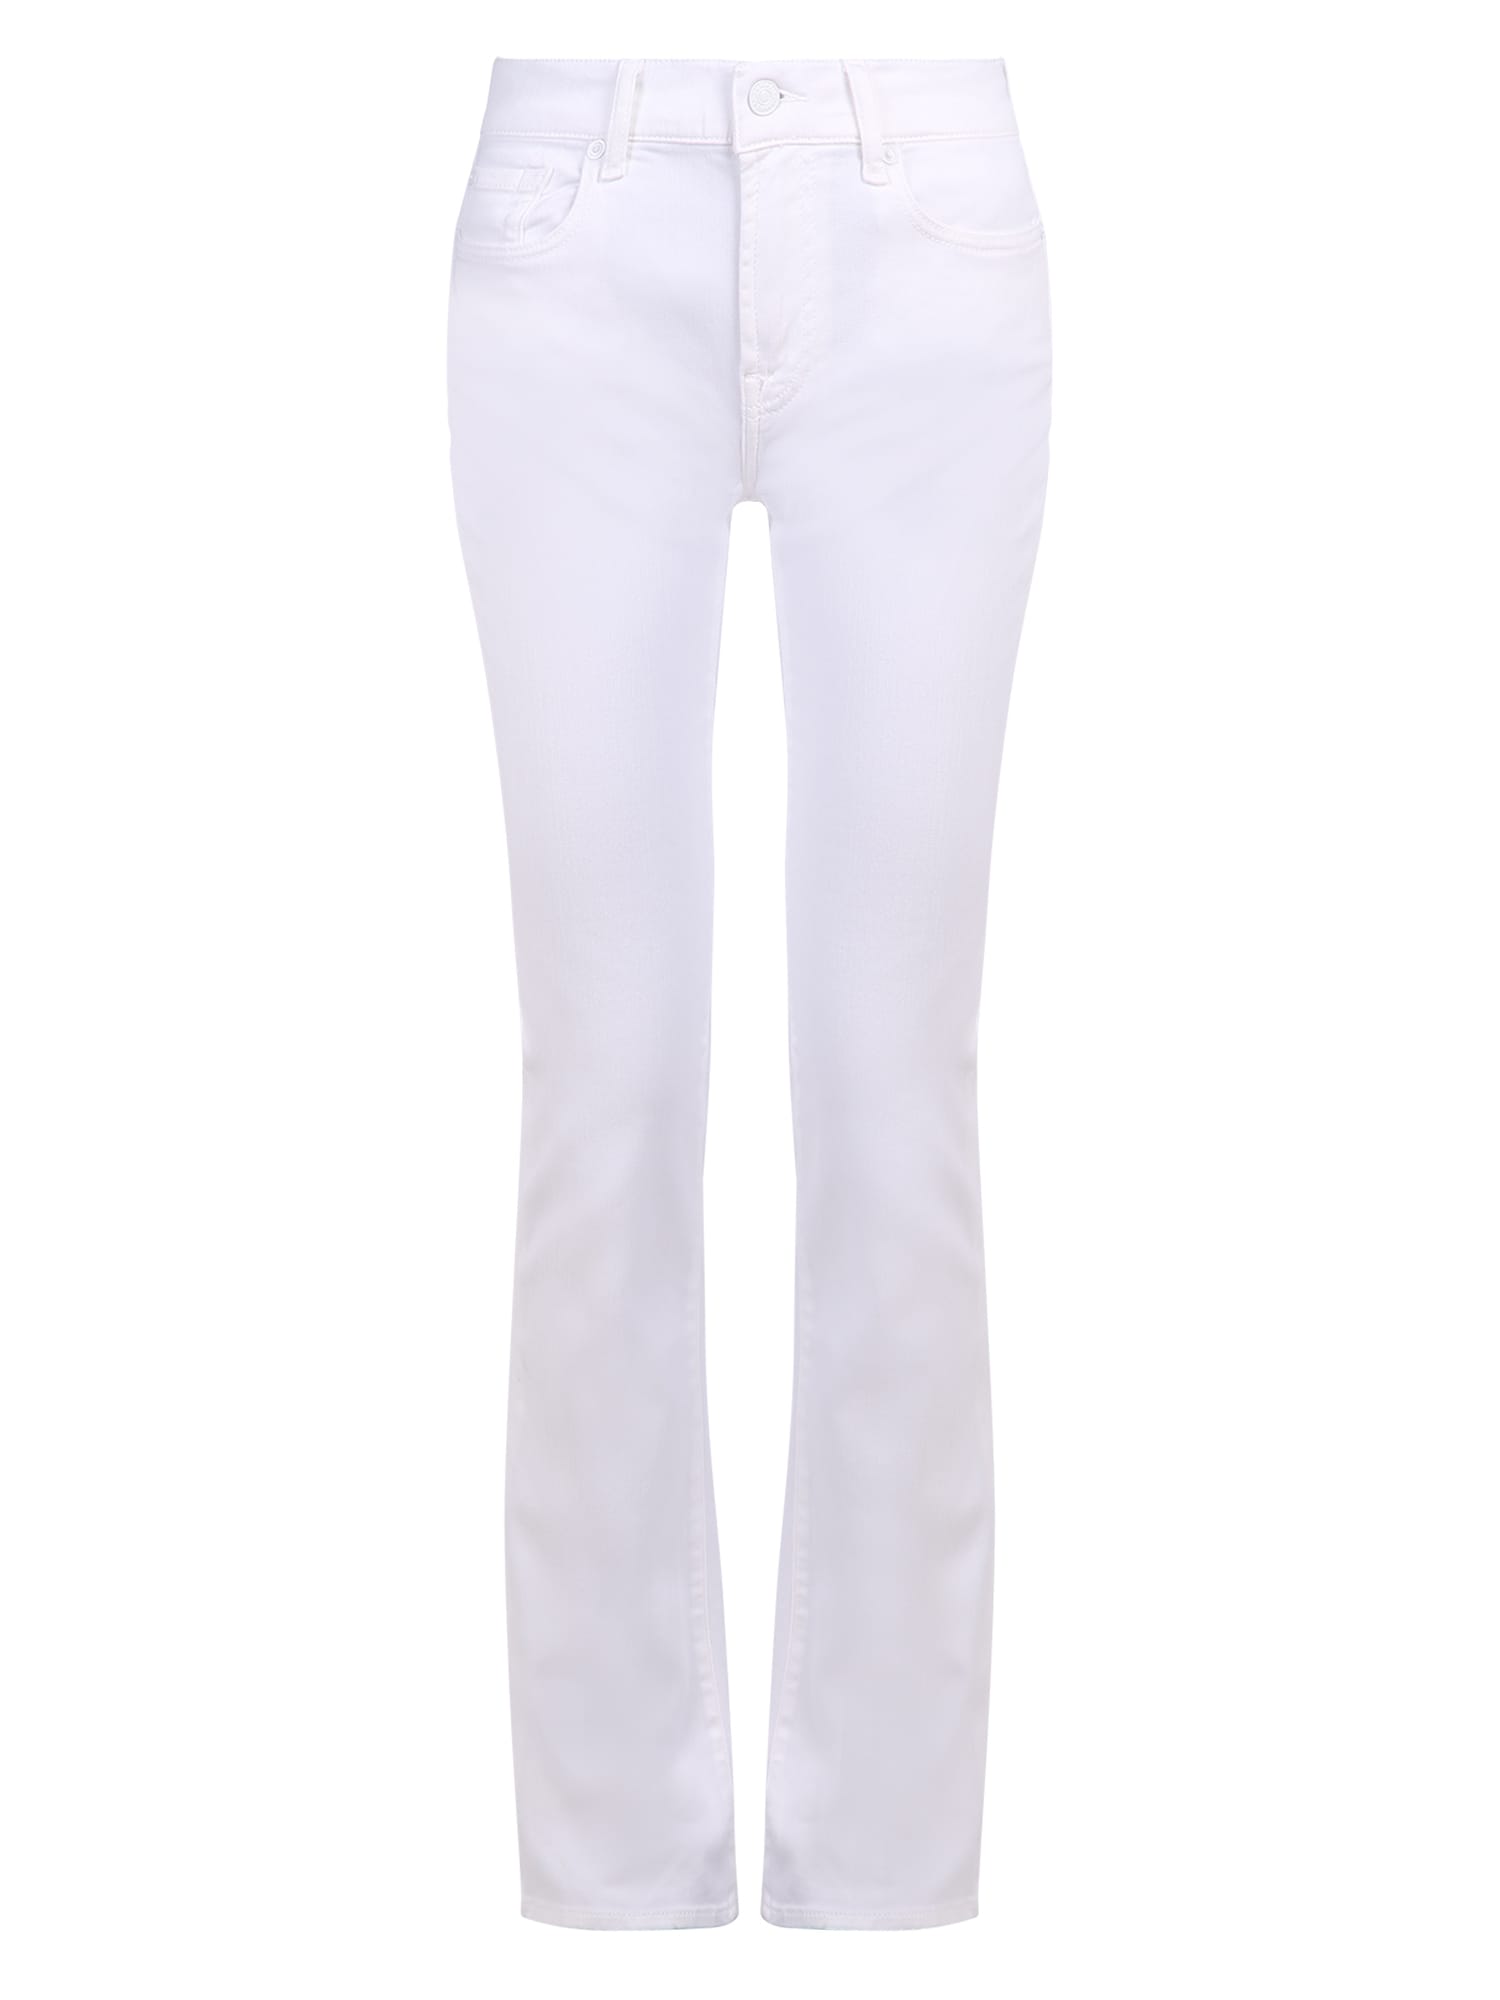 7 FOR ALL MANKIND DENIM JEANS,JSWBB660PW WHITE